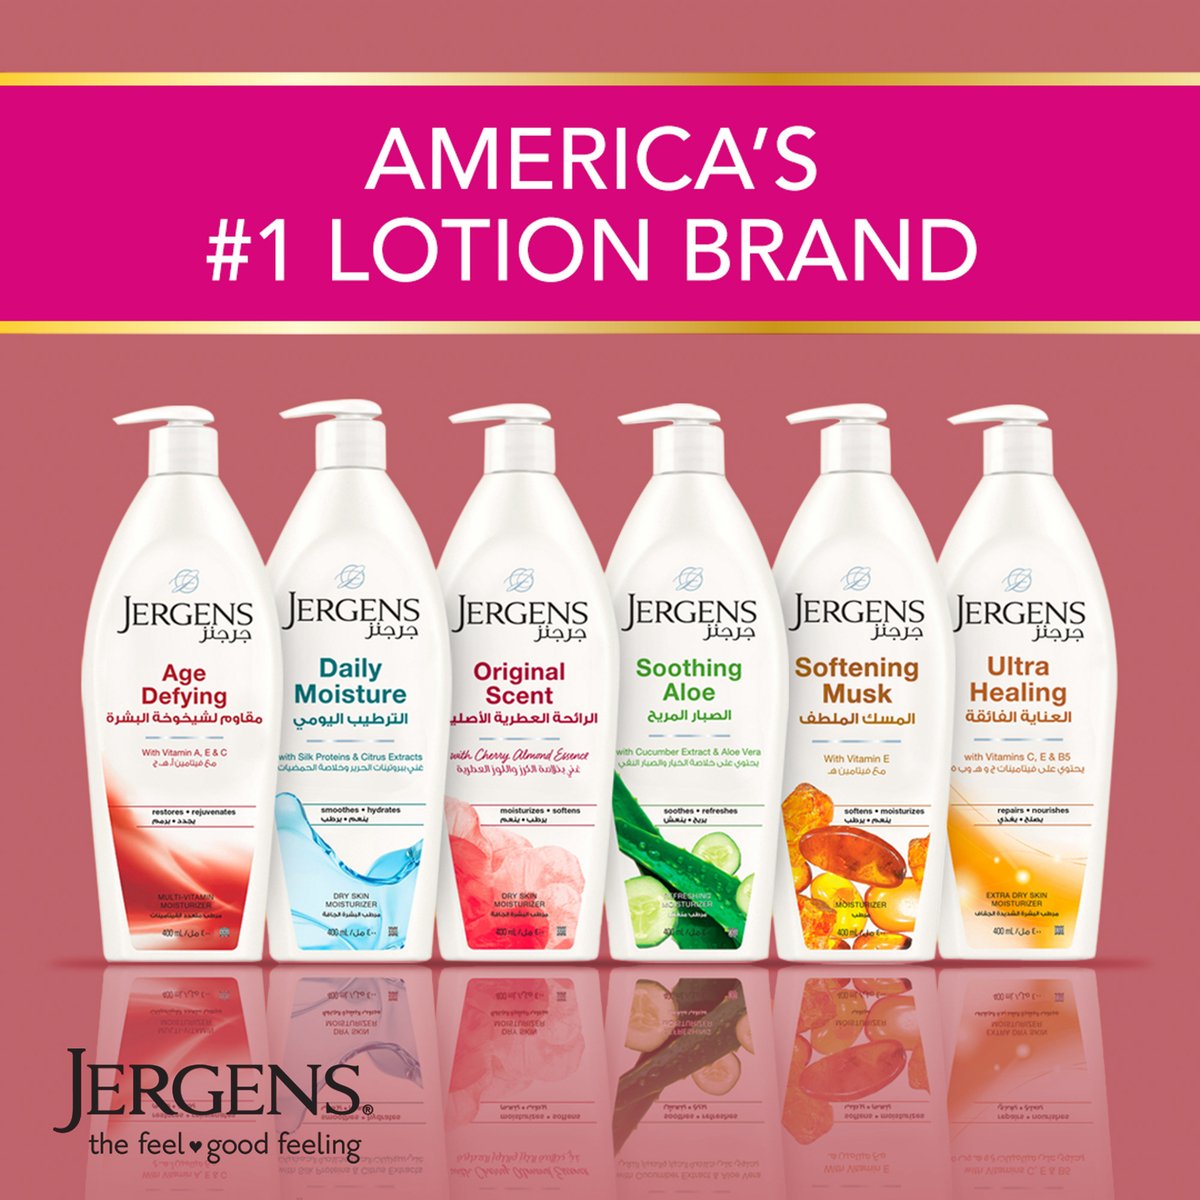 Jergens Age Defying Body Lotion, 400 ml